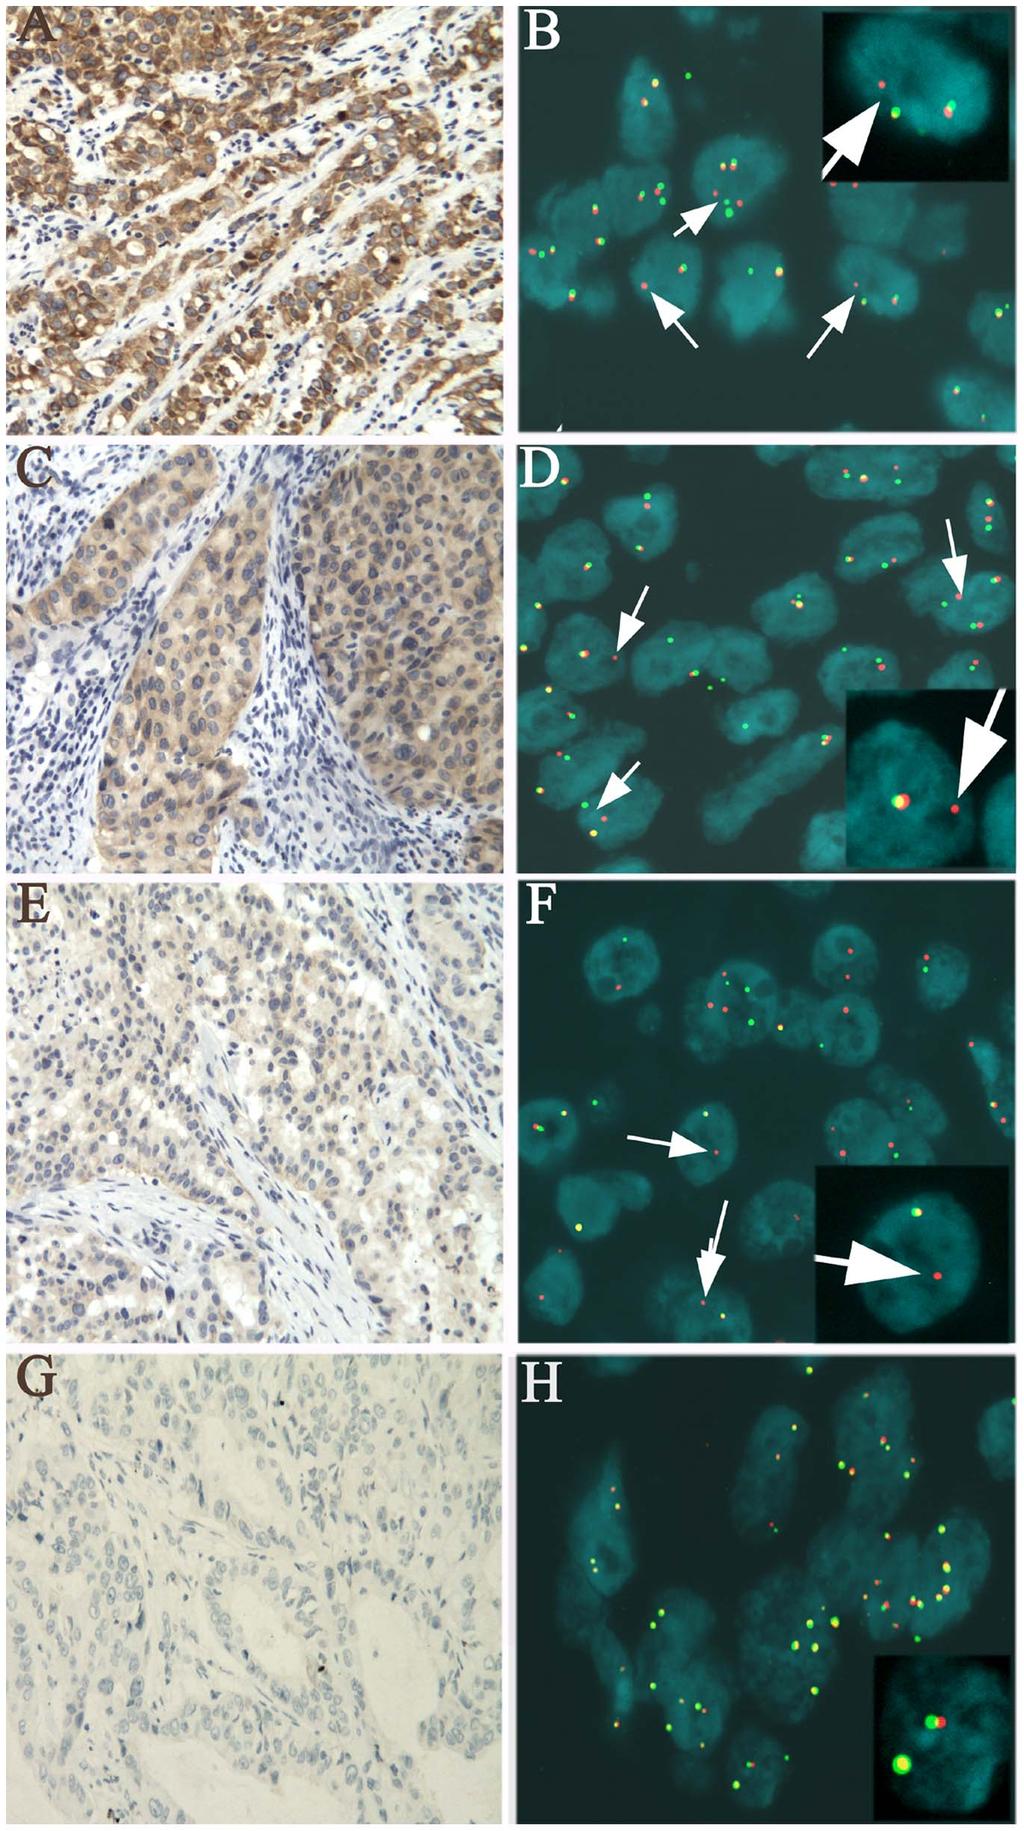 Figure 2. Histological features of ALK-rearranged lung adenocarcinomas. They showed solid signet-ring cell pattern (A), a cribriform structure (B.D), and abundant extracellular mucus (C). doi:10.